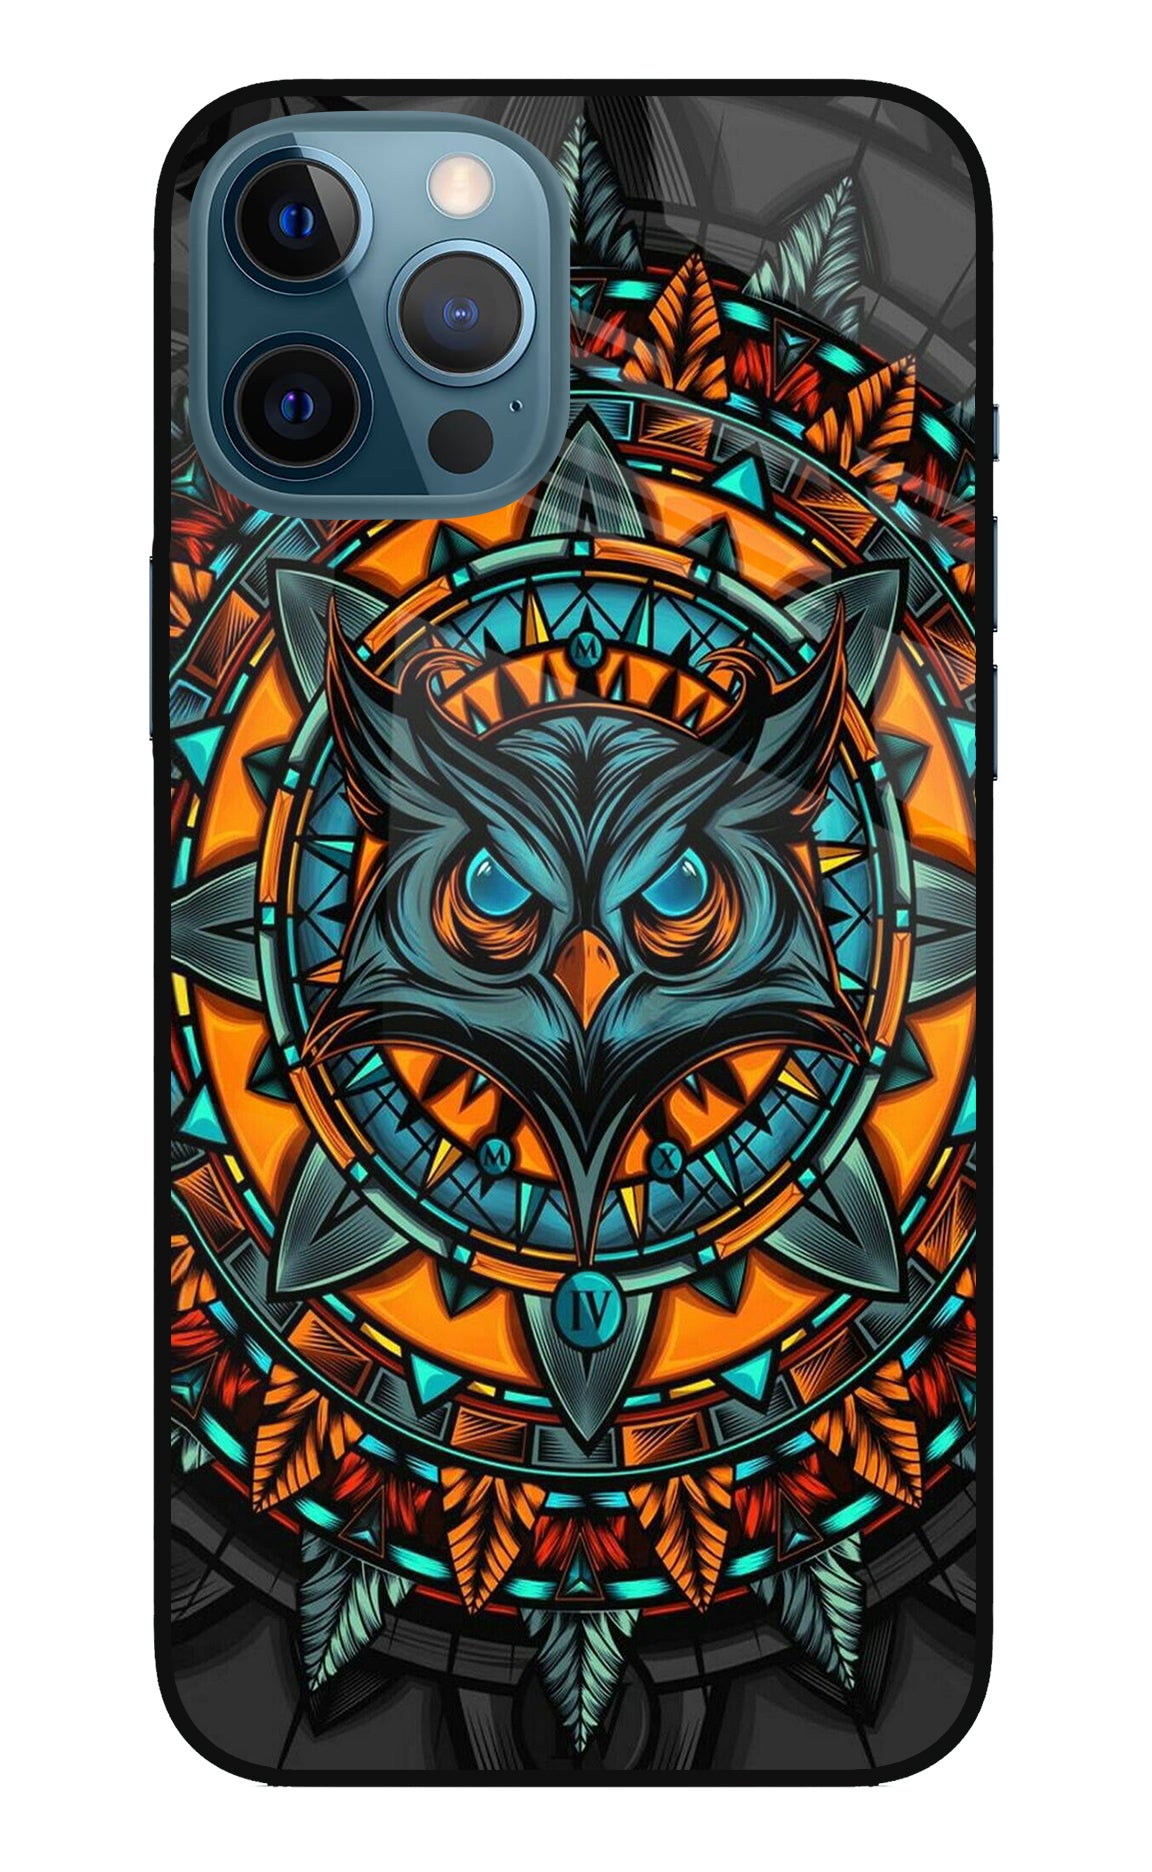 Angry Owl Art iPhone 12 Pro Max Back Cover